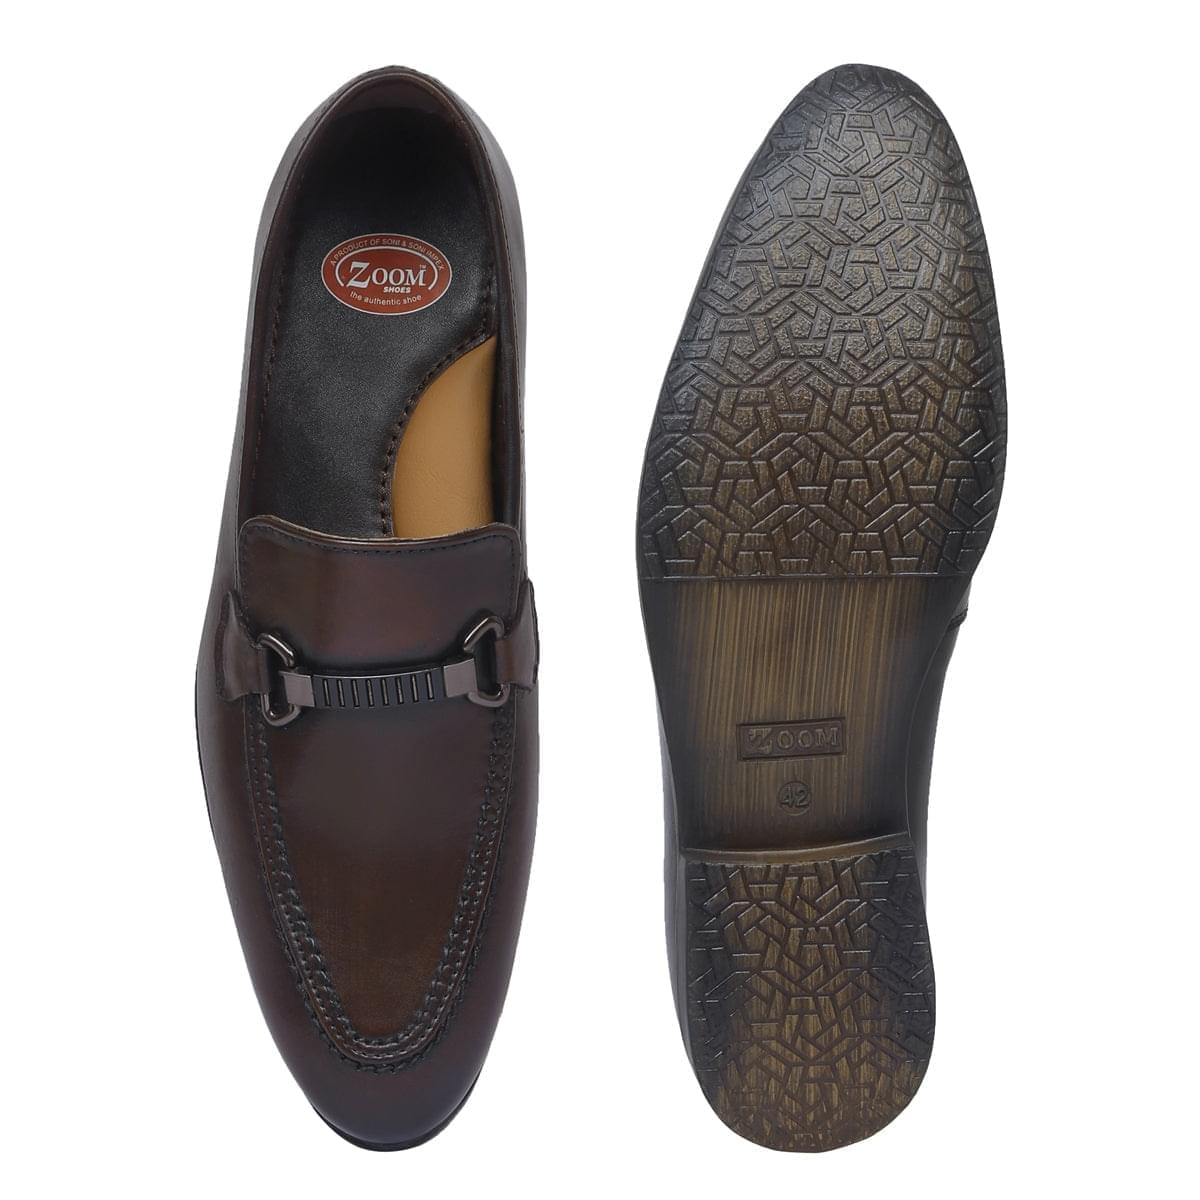 Classic Leather Shoes for Men 2939